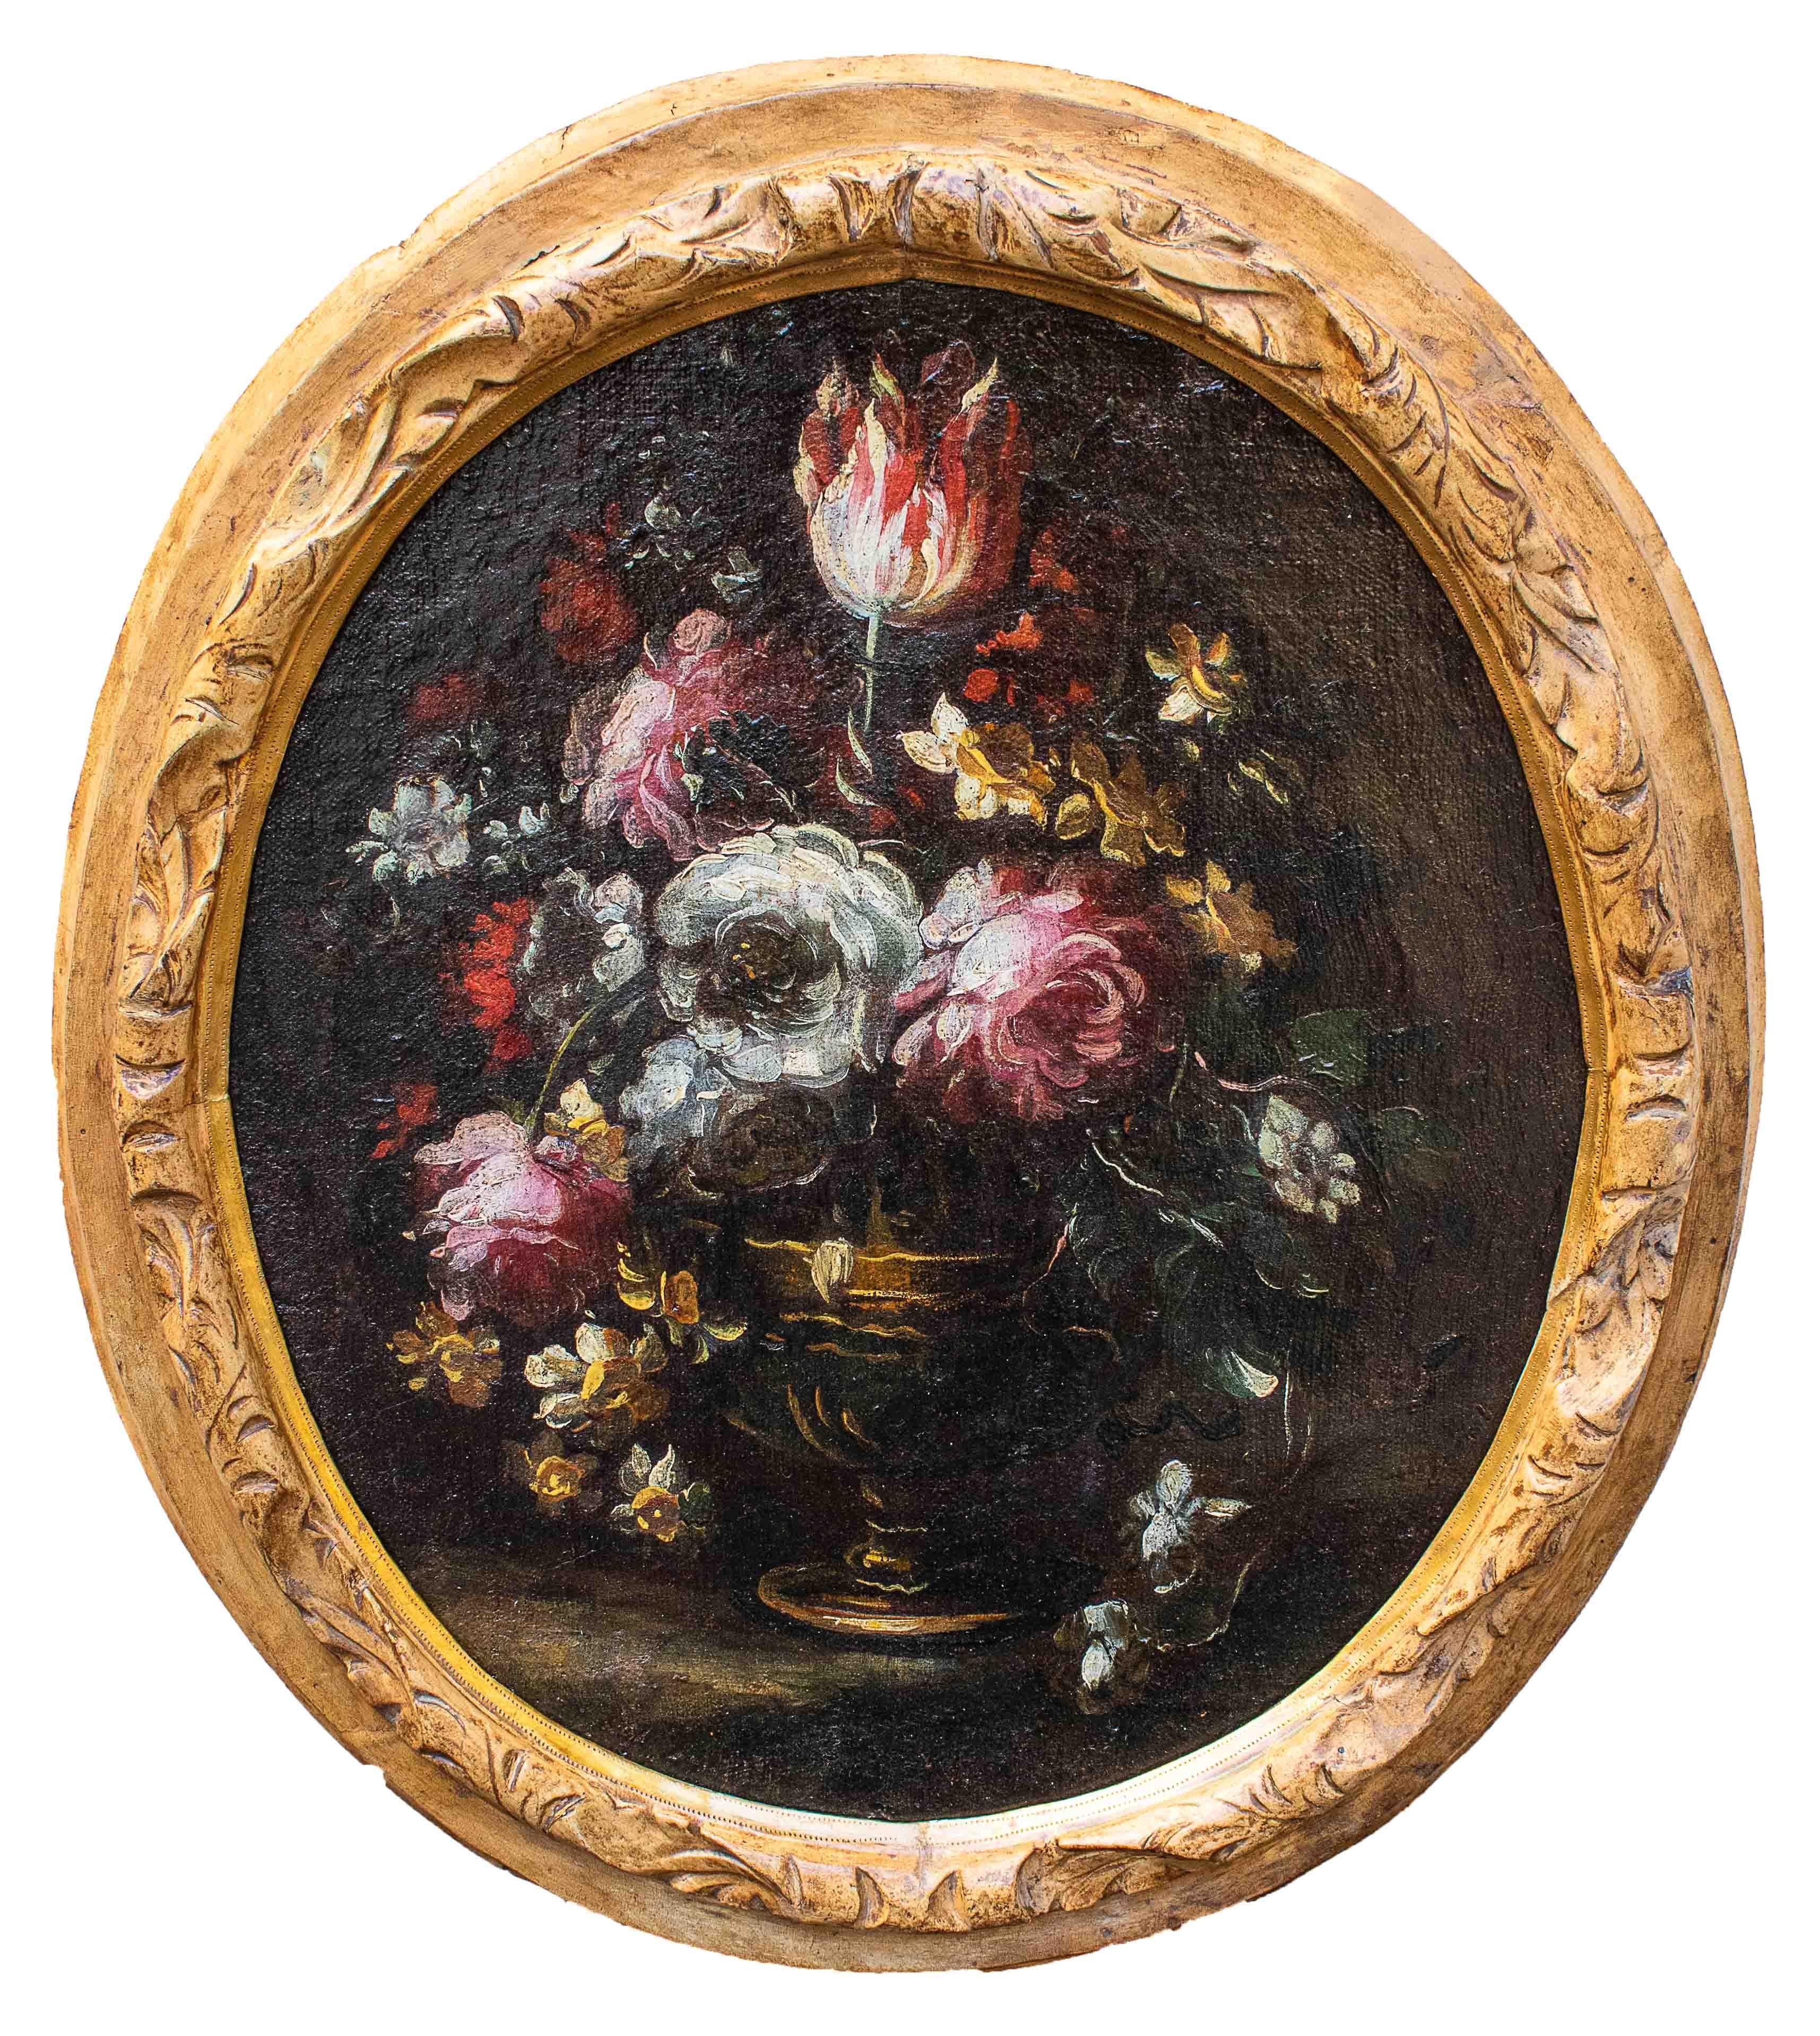 Italian 17th Century Still Lifes with Flowers Paintings Oil on Canvas